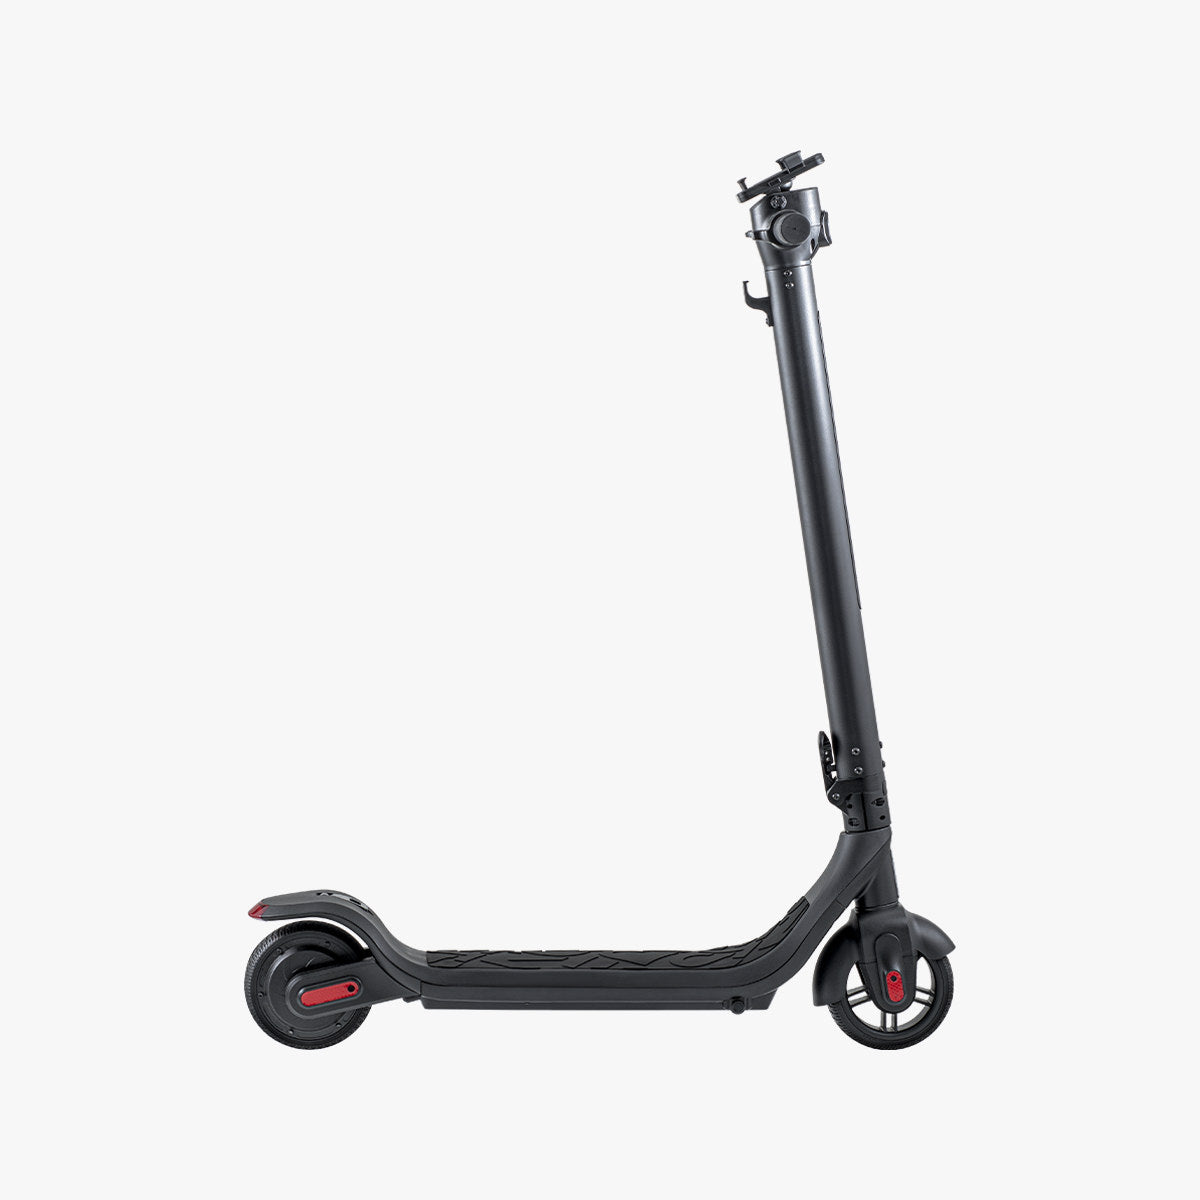 side profile view of Rhythm e-scooter unfolded